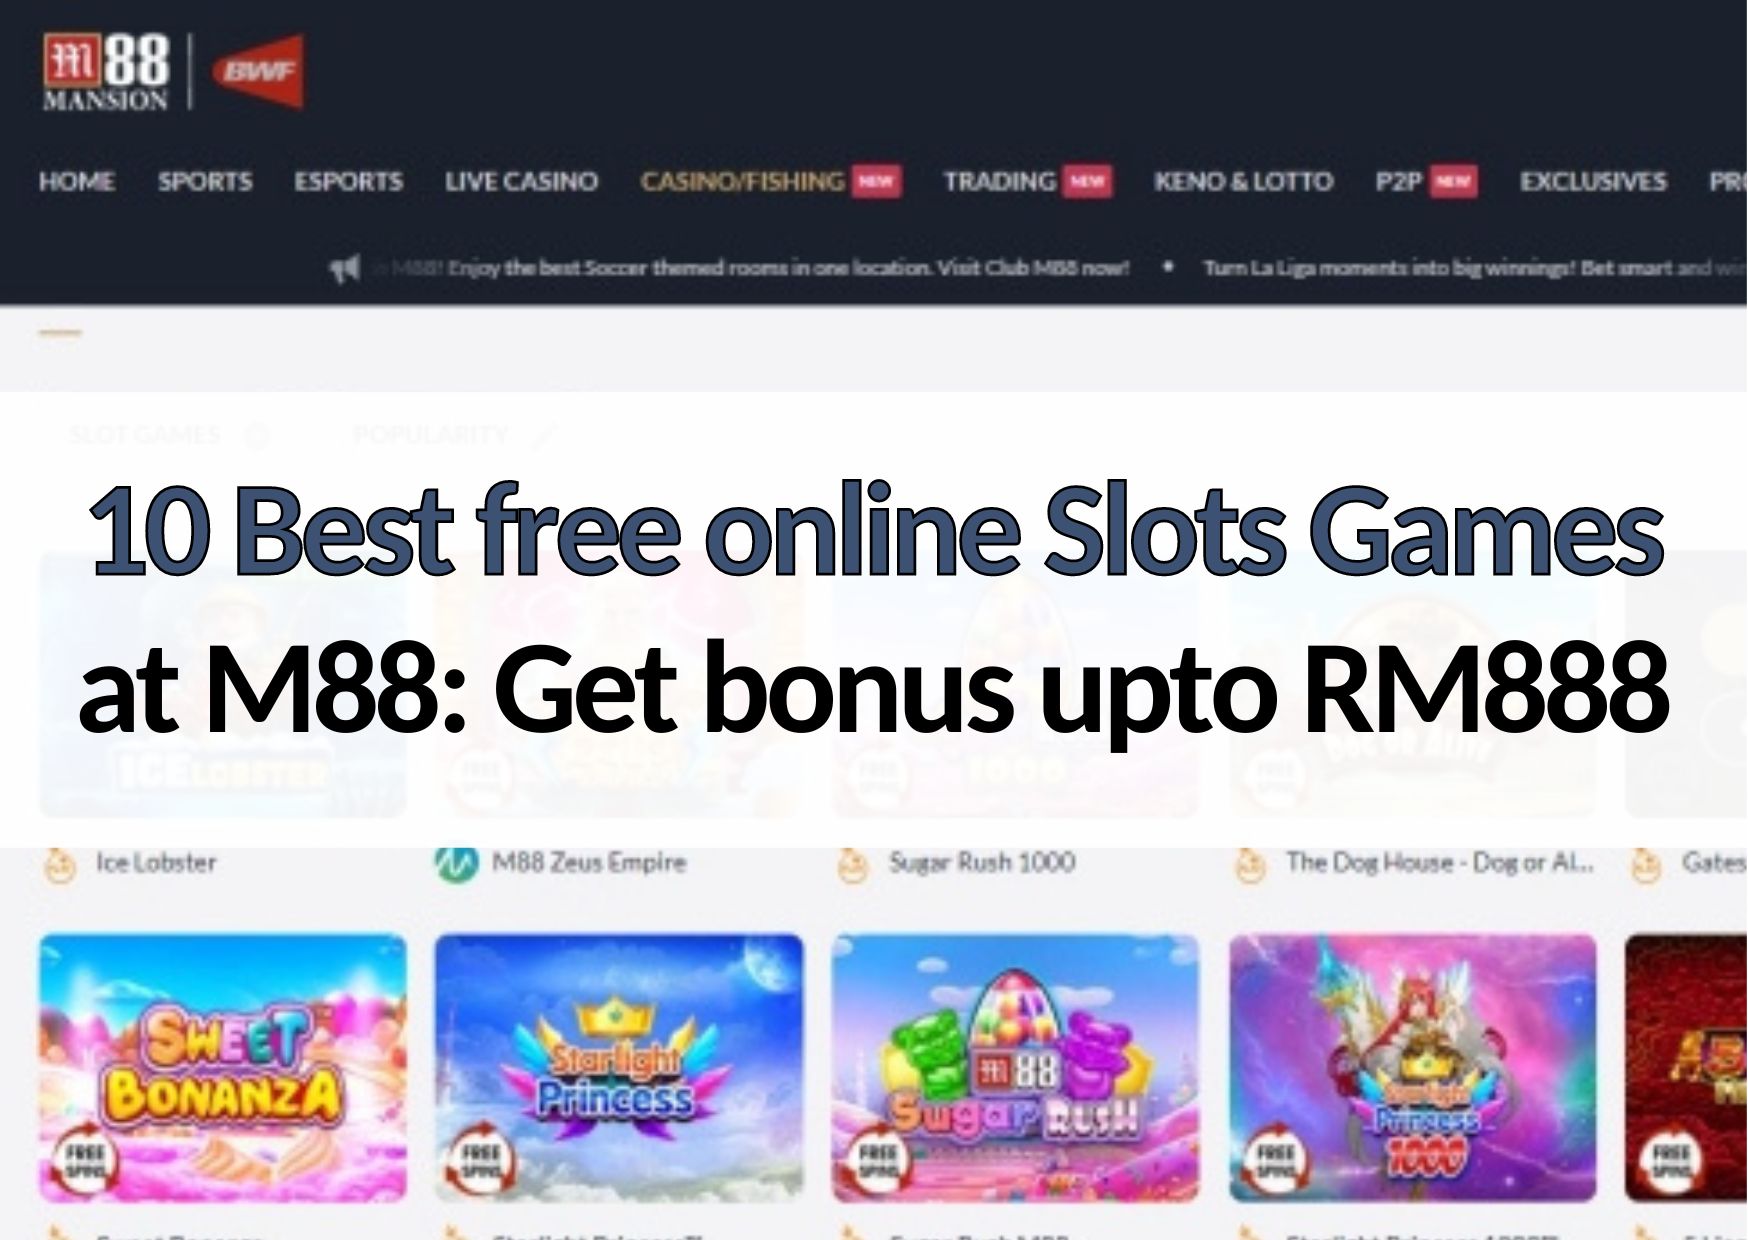 10 best free online slots games at m88 that you should try